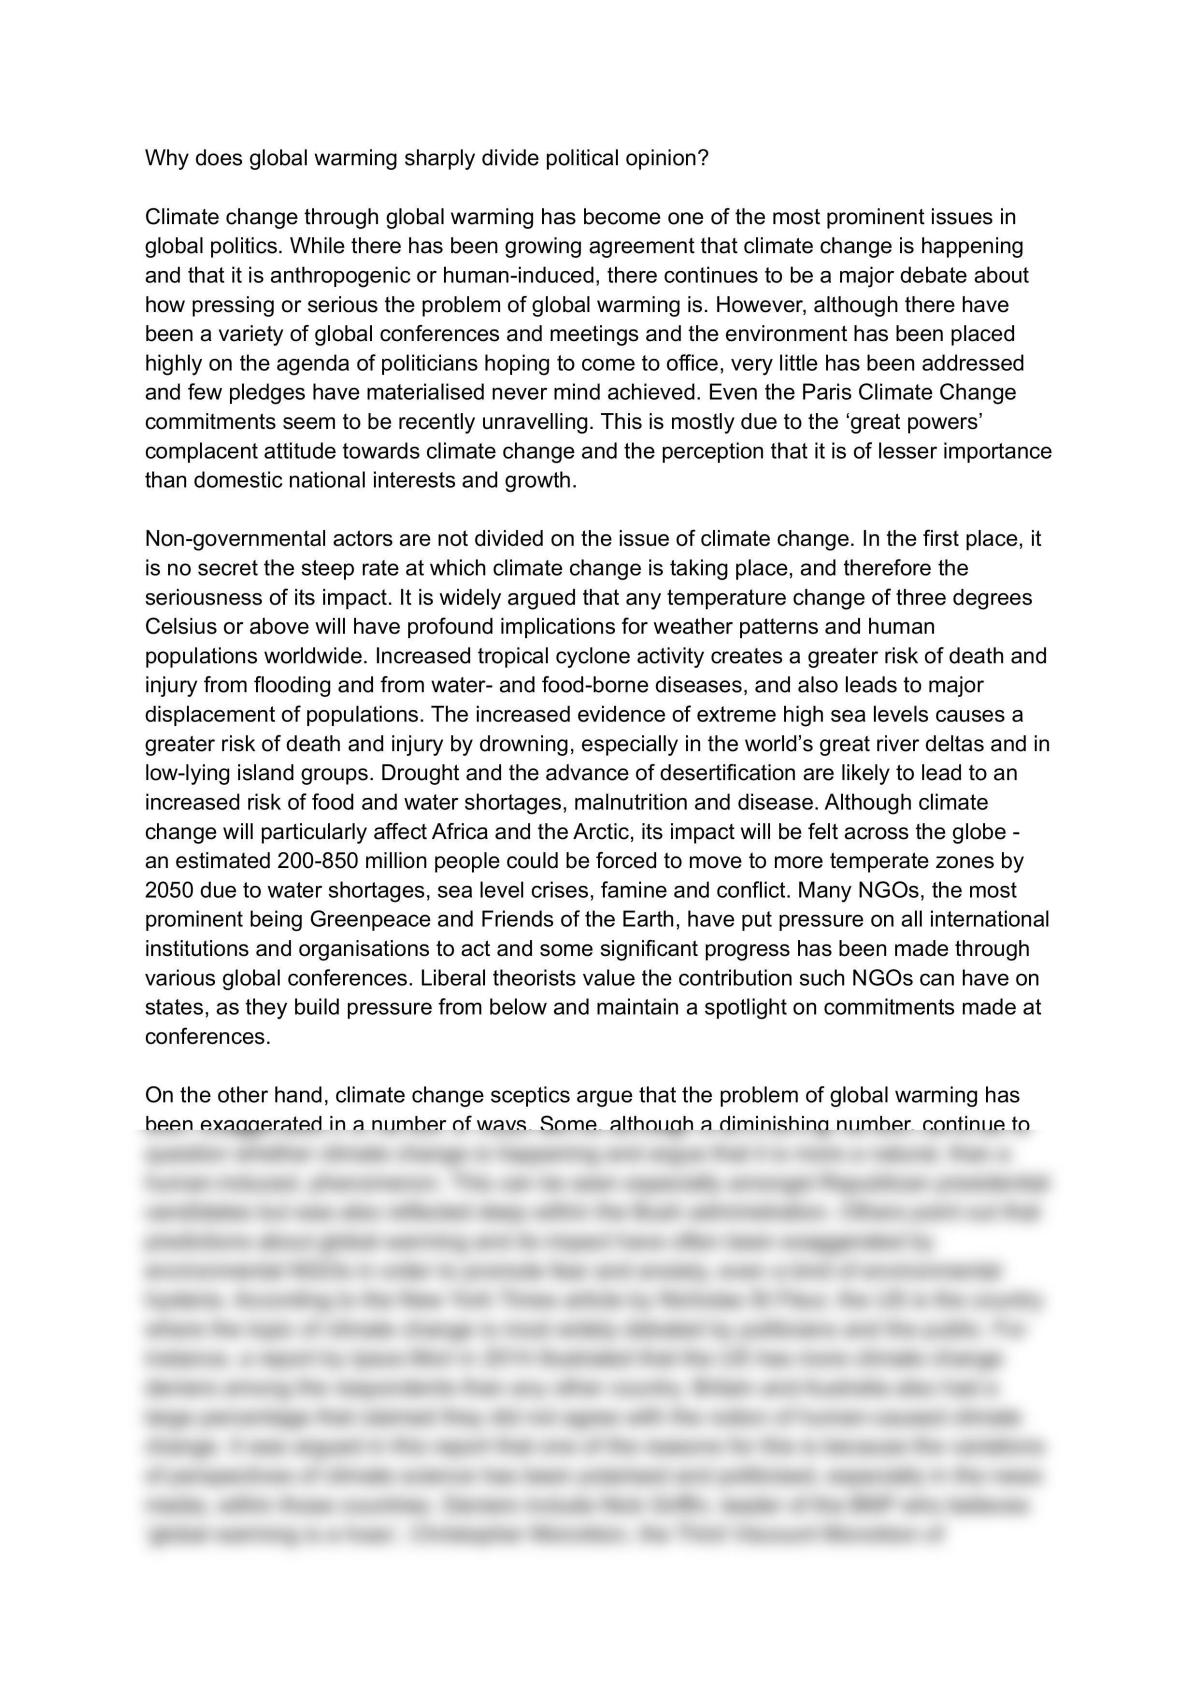 Why Does Global Warming Sharply Divide Political Opinion - Page 1